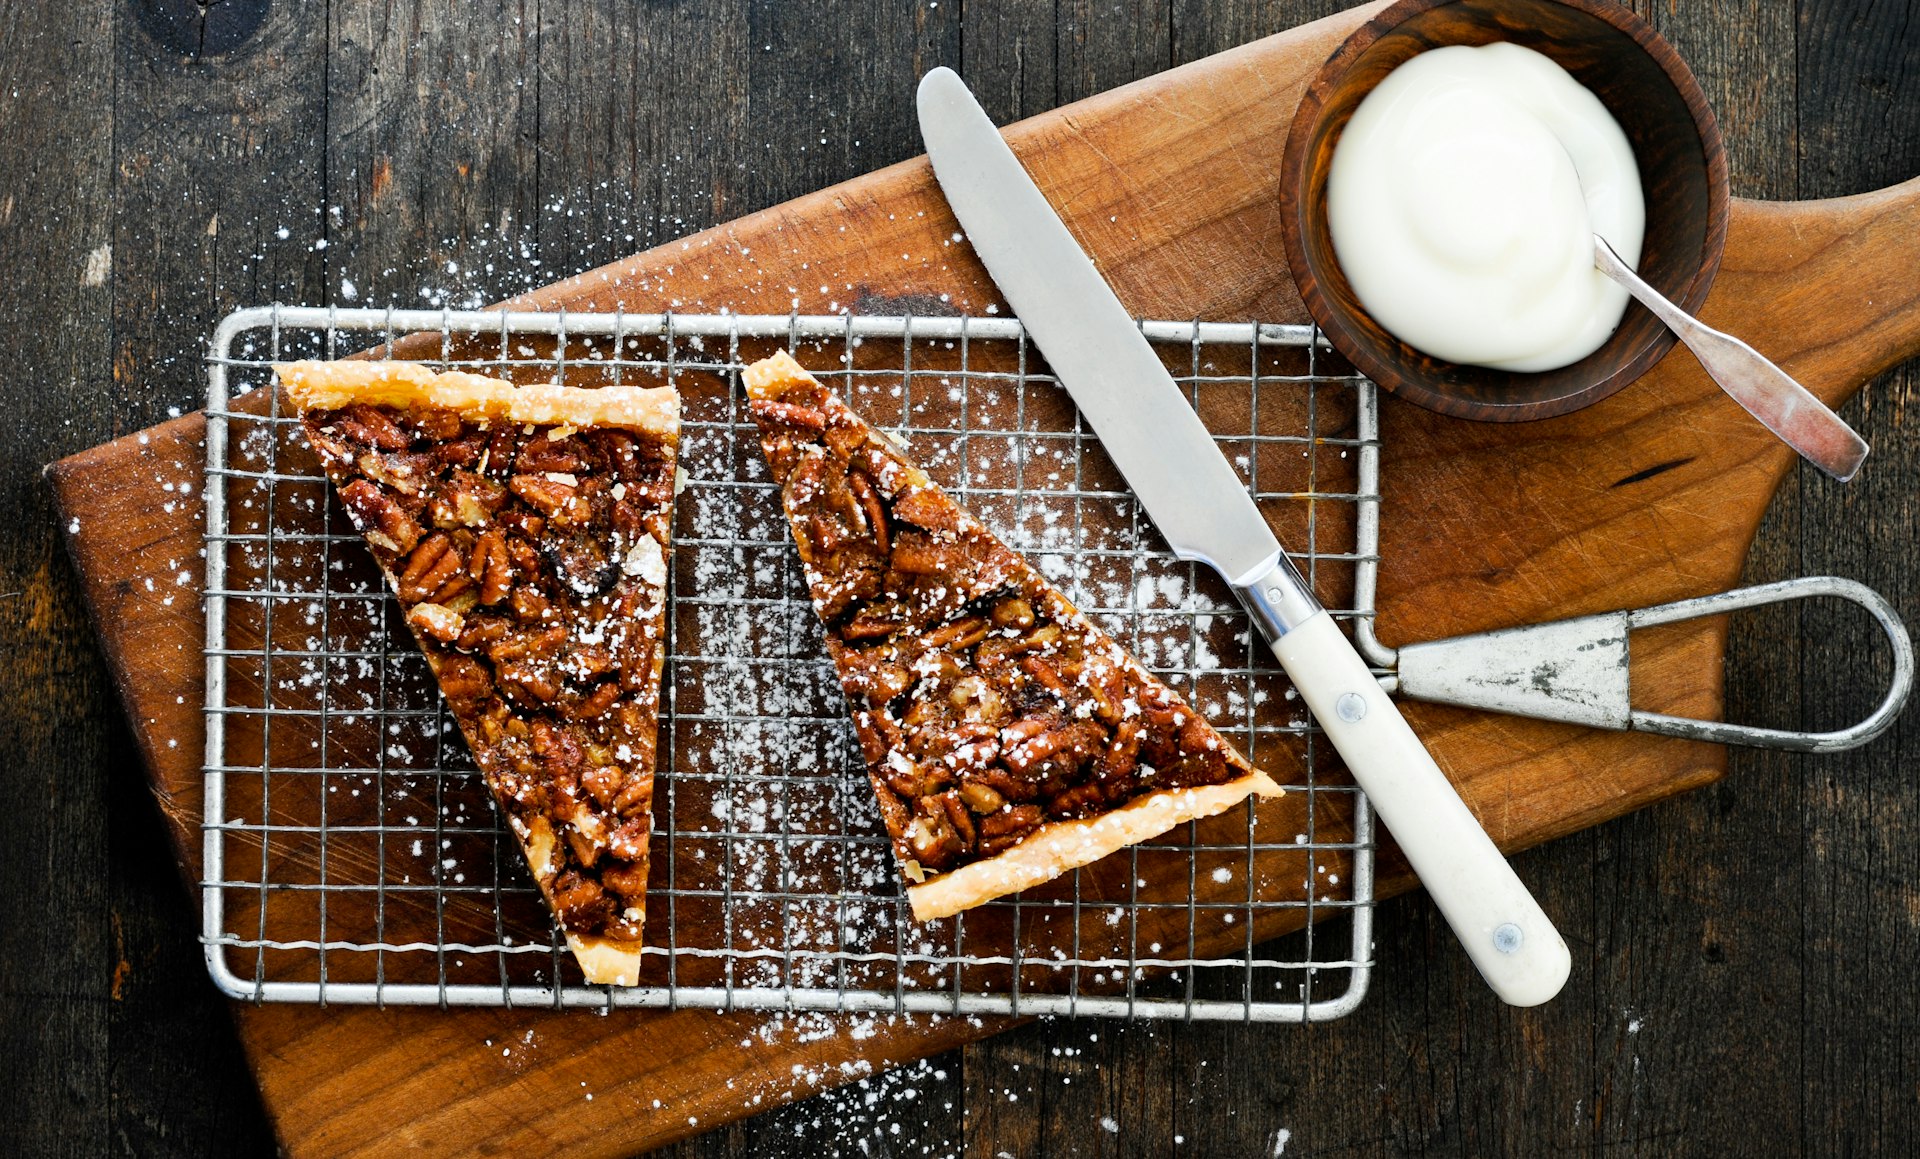 Small pecan tarts on a wooden cutting board with a knife and whipped cream